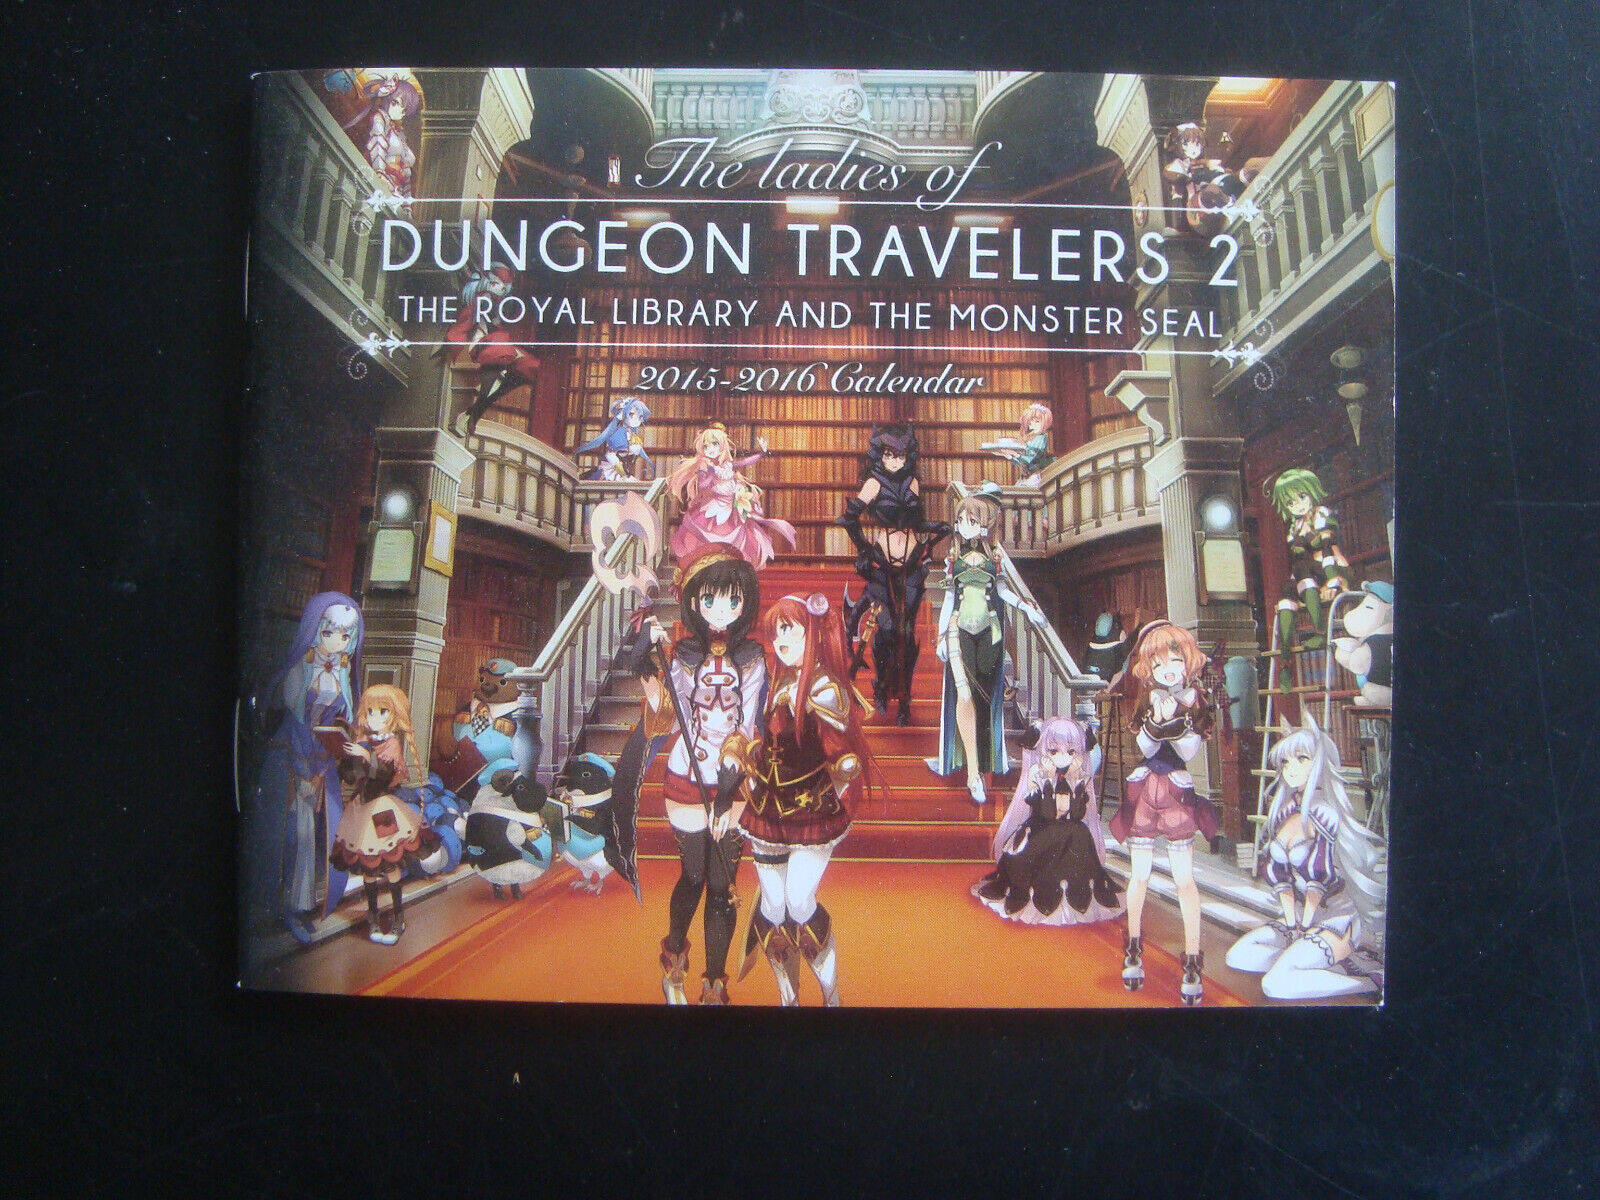 Dungeon Travelers 2 The Royal Library & the Monster Seal Calendar Ladies of